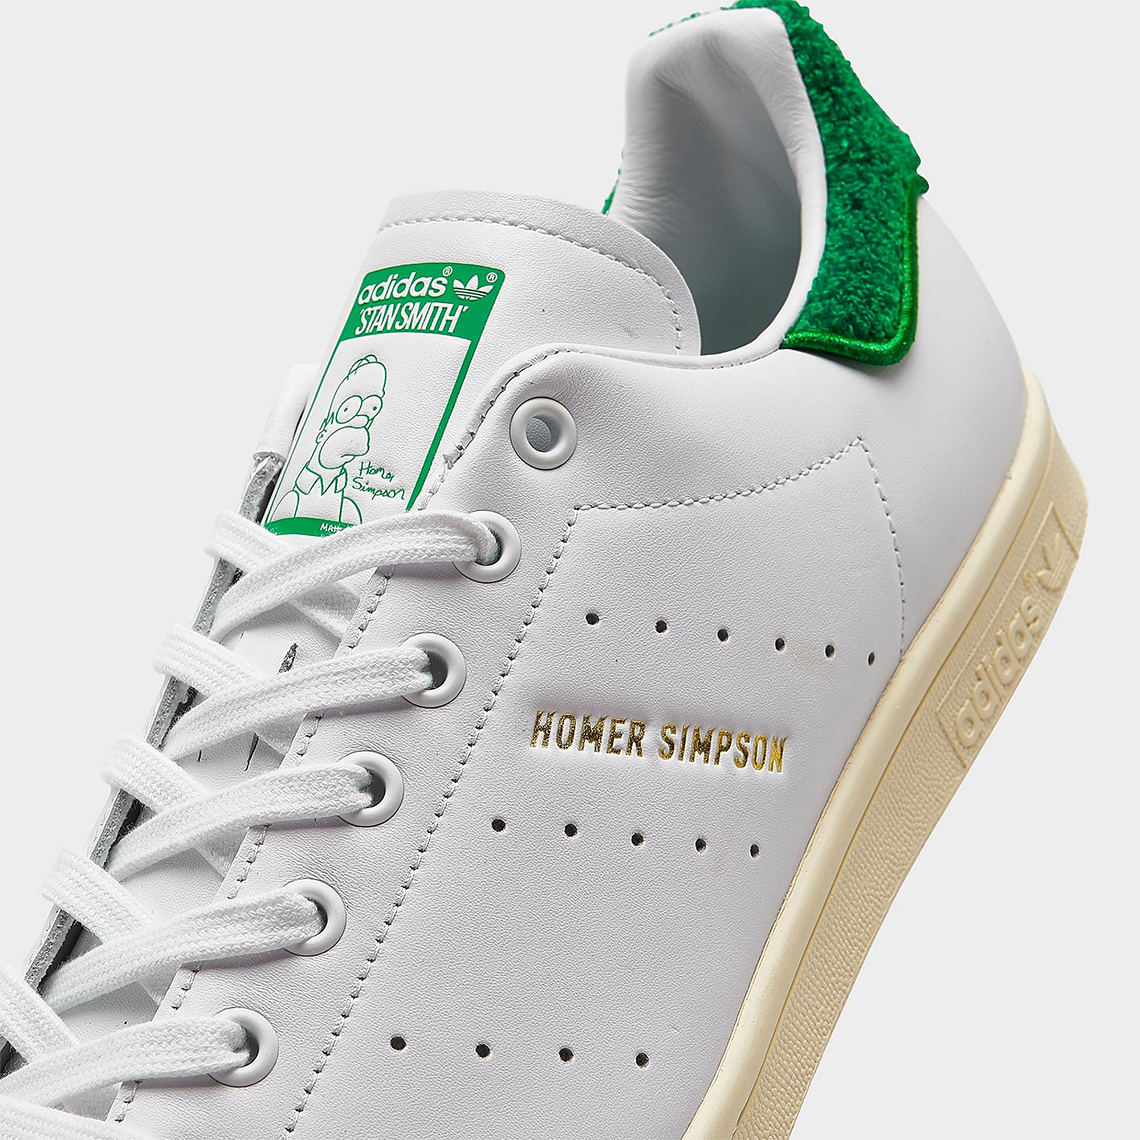 homer simpson adidas stan smith ie7564 release date 5